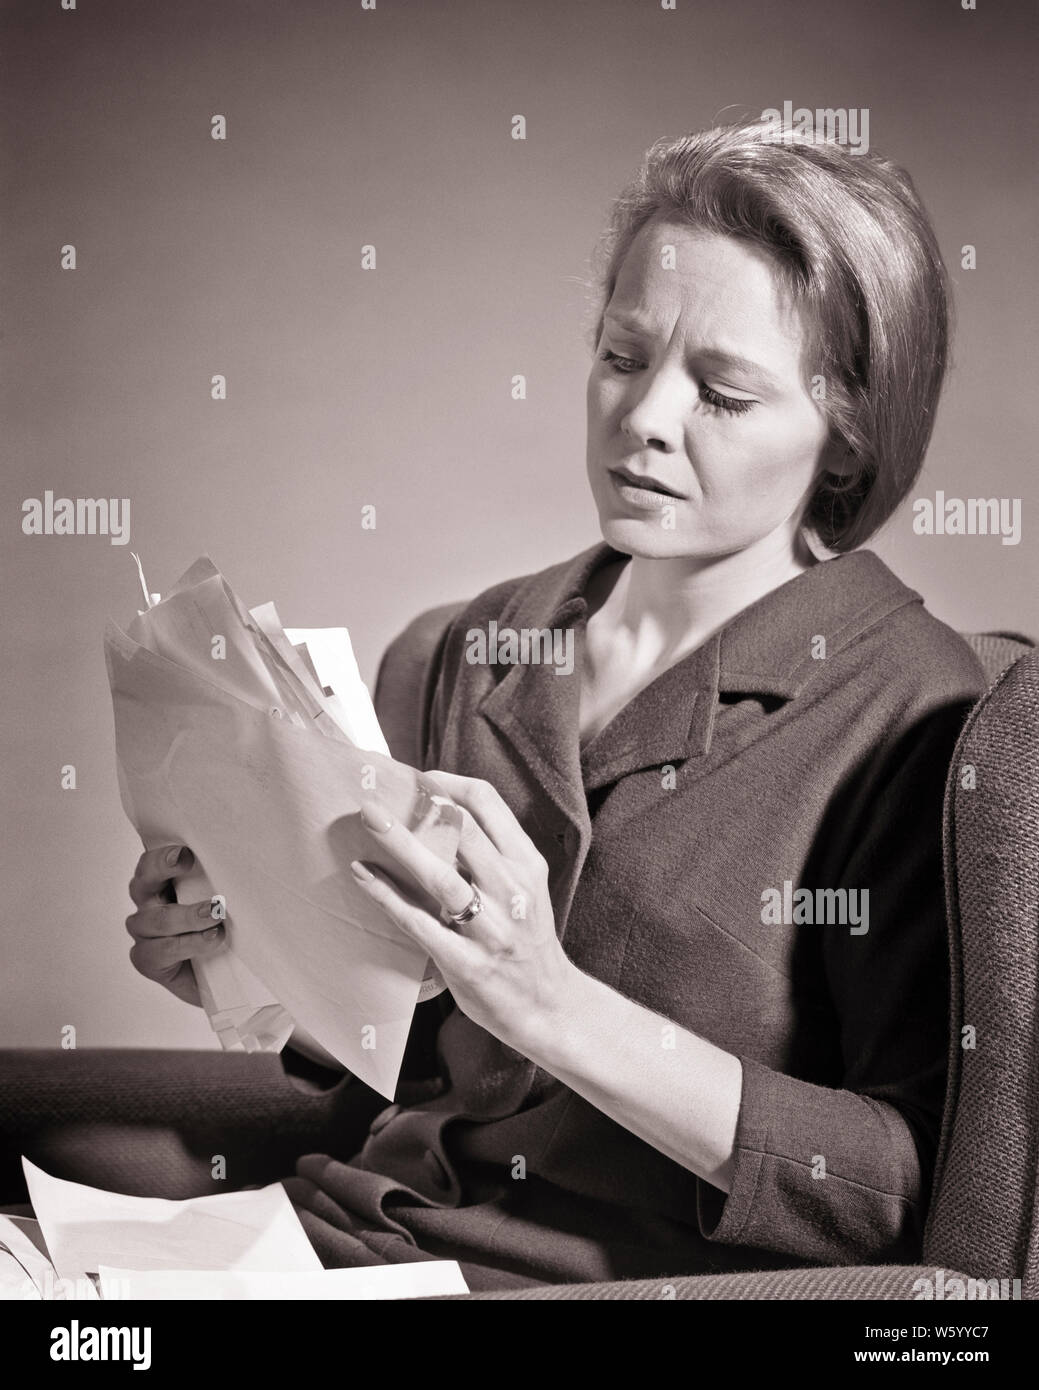 1960s WORRIED WOMAN HOLDING TWO HANDS FULL OF BILLS AND INVOICES SITTING READING AND LOOKING AT OVERWHELMING AMOUNT OF PAPERWORK - s15423 HAR001 HARS TROUBLE DEBT WORRY PROBLEM ABSTRACT LIFESTYLE FEMALES STUDIO SHOT MOODY HOME LIFE COPY SPACE HALF-LENGTH LADIES PERSONS RISK EXPRESSIONS TROUBLED B&W SADNESS EYE CONTACT HOMEMAKER HOMEMAKERS DISTRESSED AND AT OF CONCERN HOUSEWIVES MOOD GLUM AMOUNT ESCAPE BANKRUPT MISERABLE OVERWHELMING YOUNG ADULT WOMAN BLACK AND WHITE CAUCASIAN ETHNICITY HAR001 INVOICES OLD FASHIONED Stock Photo